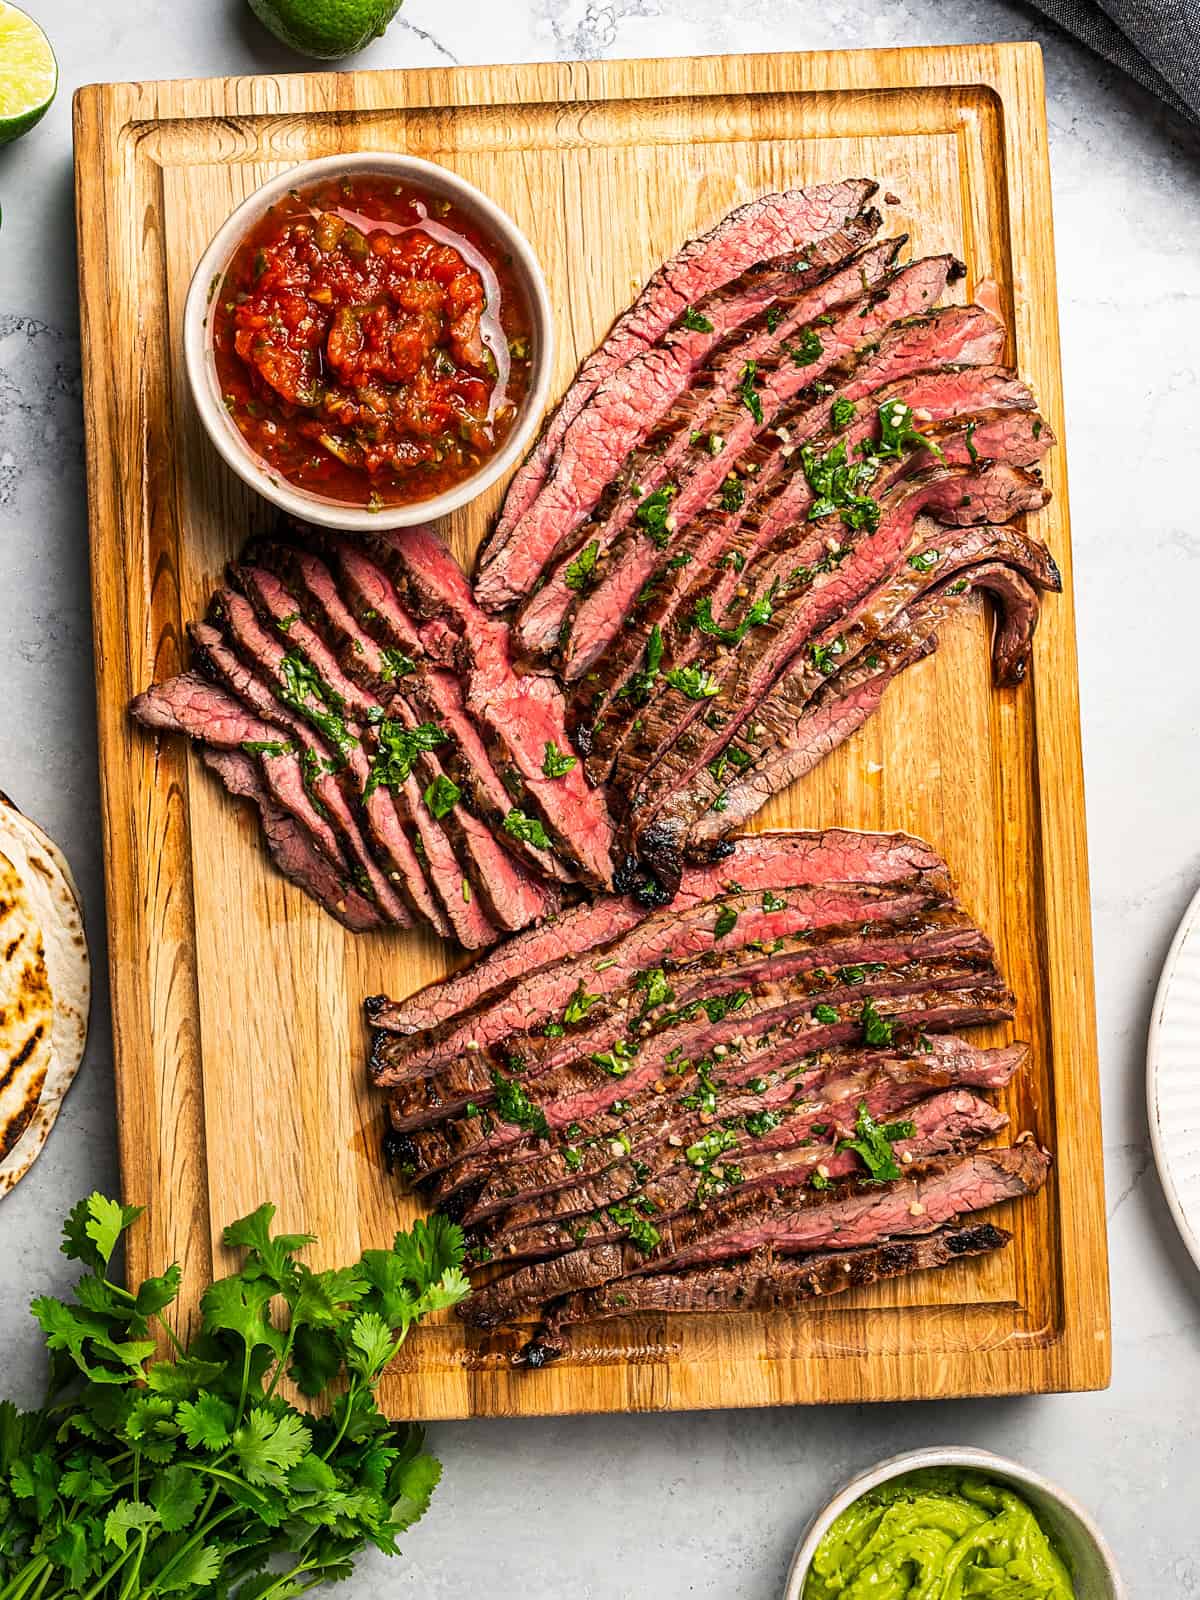 Slices of Carne Asada on a wooden cutting board. A bowl of pico de gallo is also set near the meat.